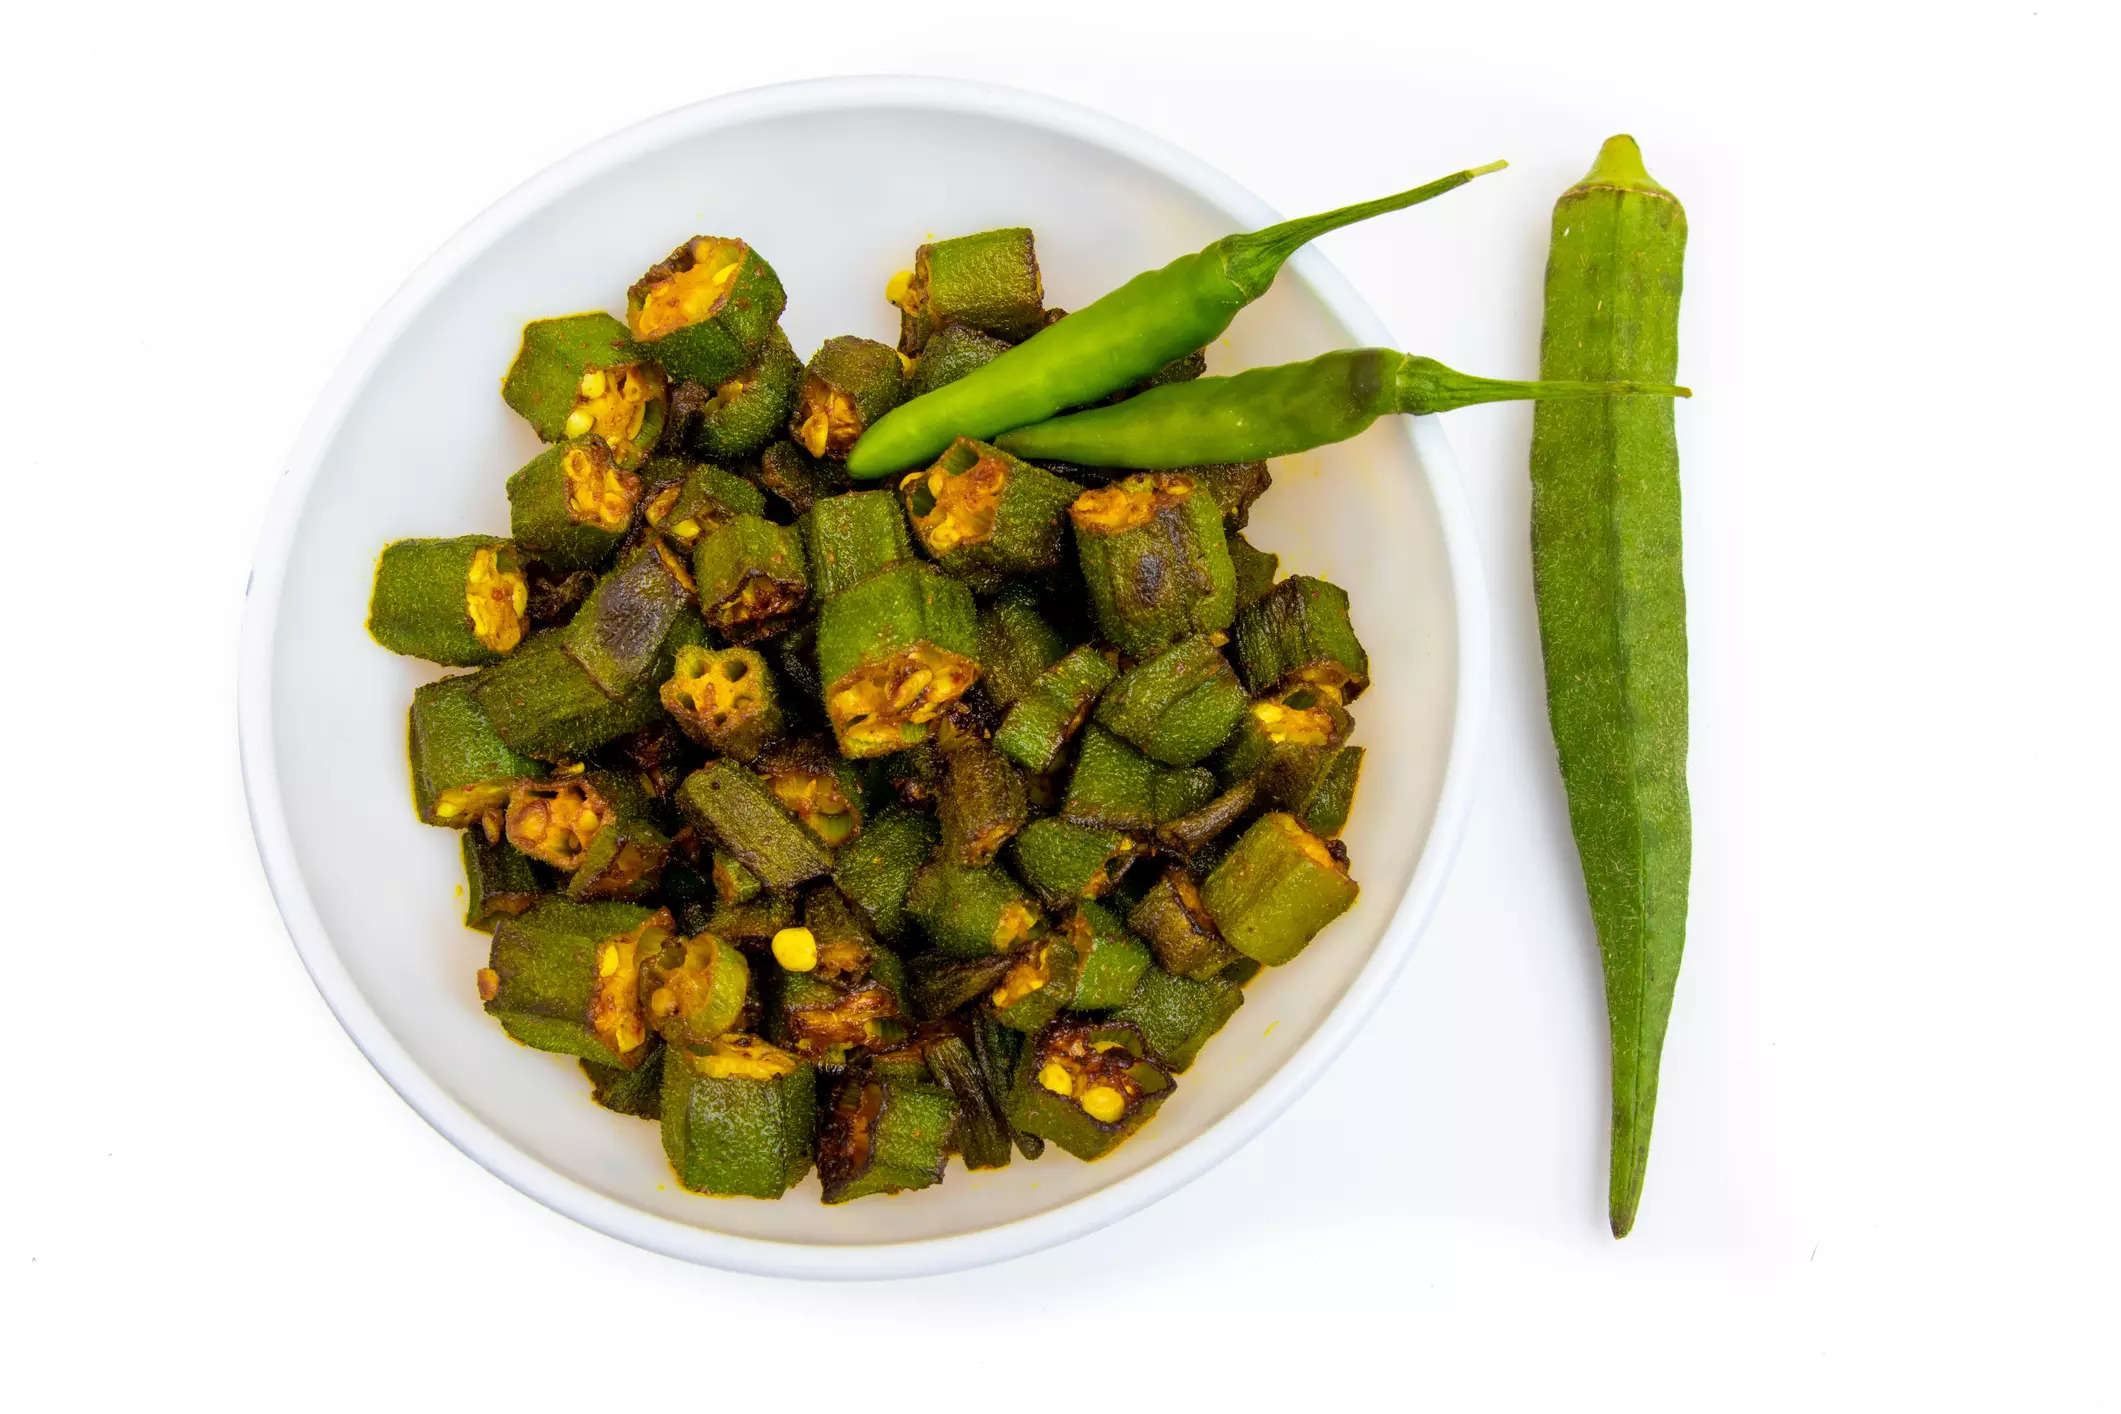 Okra, lady’s finger or bhindi – a versatile summer fruit (which is actually cooked as a vegetable), this one goes well with curries and raita.